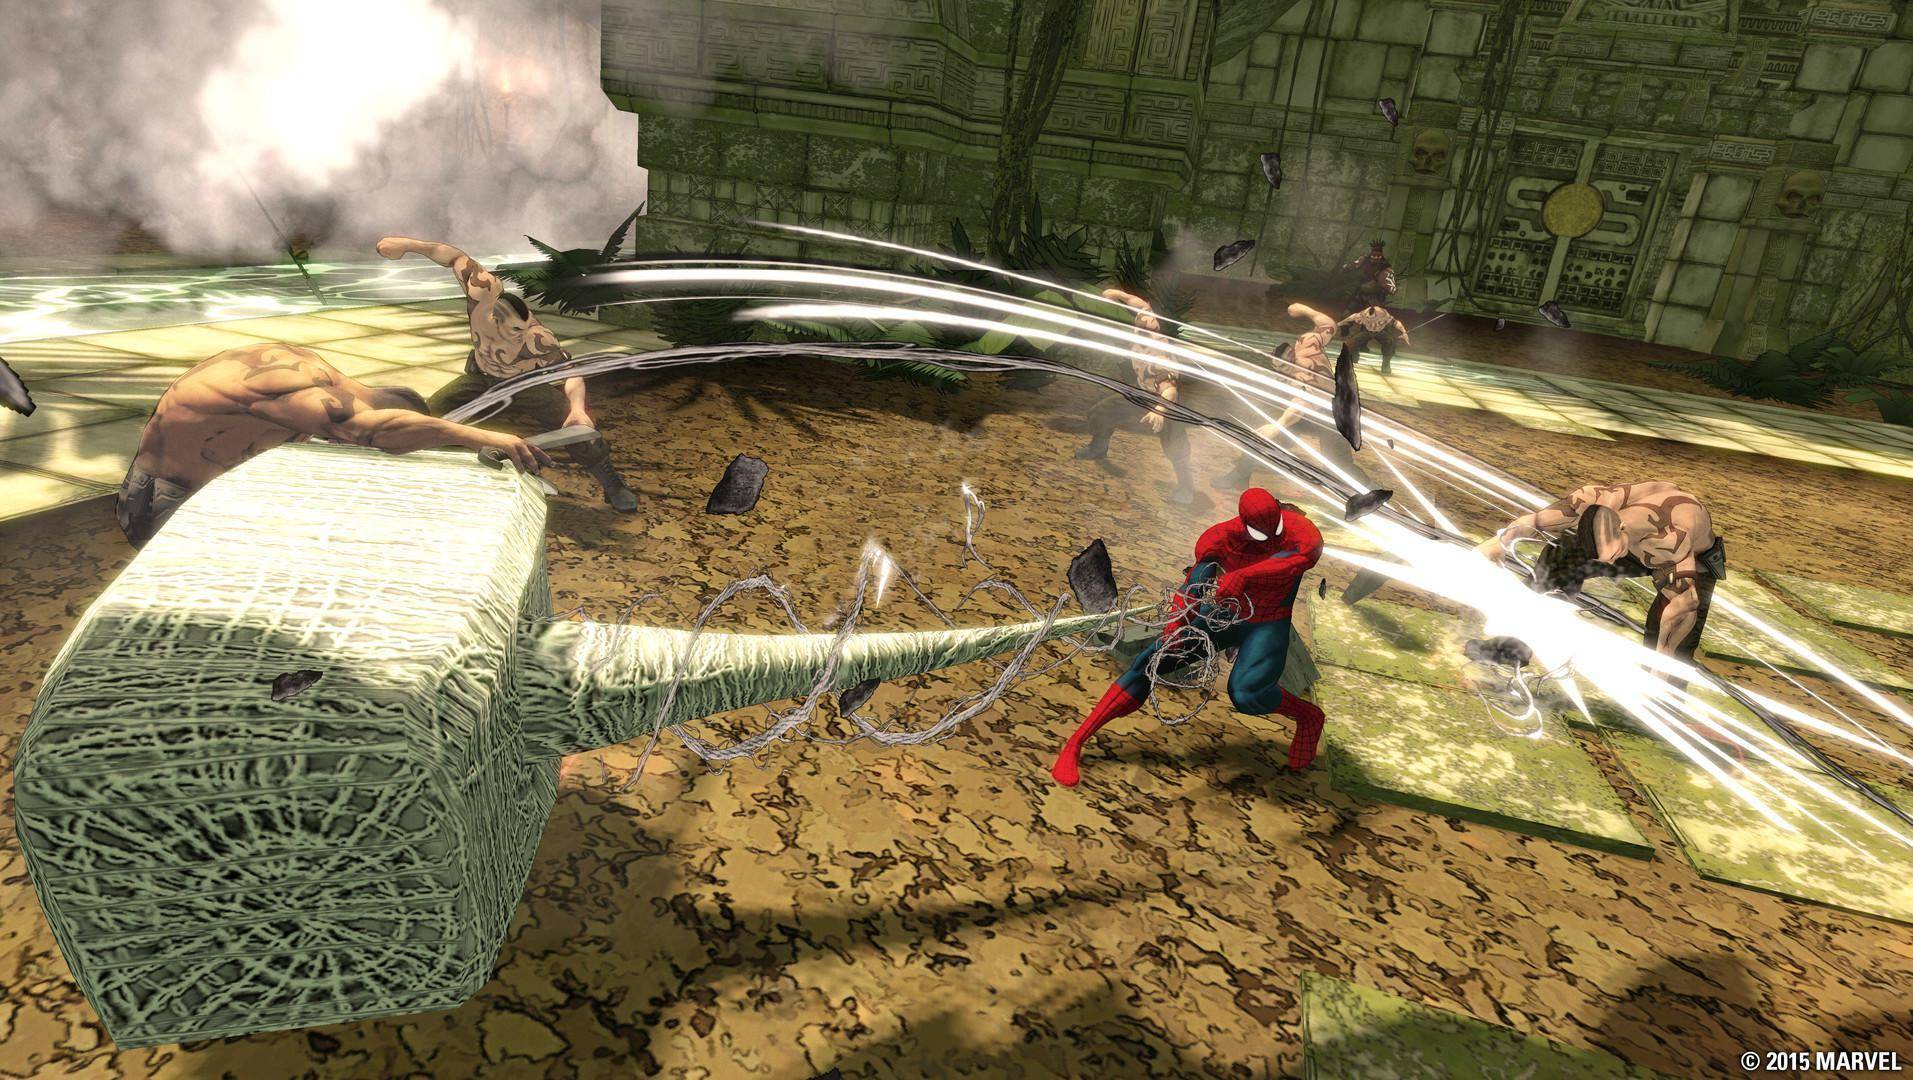 SpiderMan Shattered Dimensions (PC) Key cheap Price of